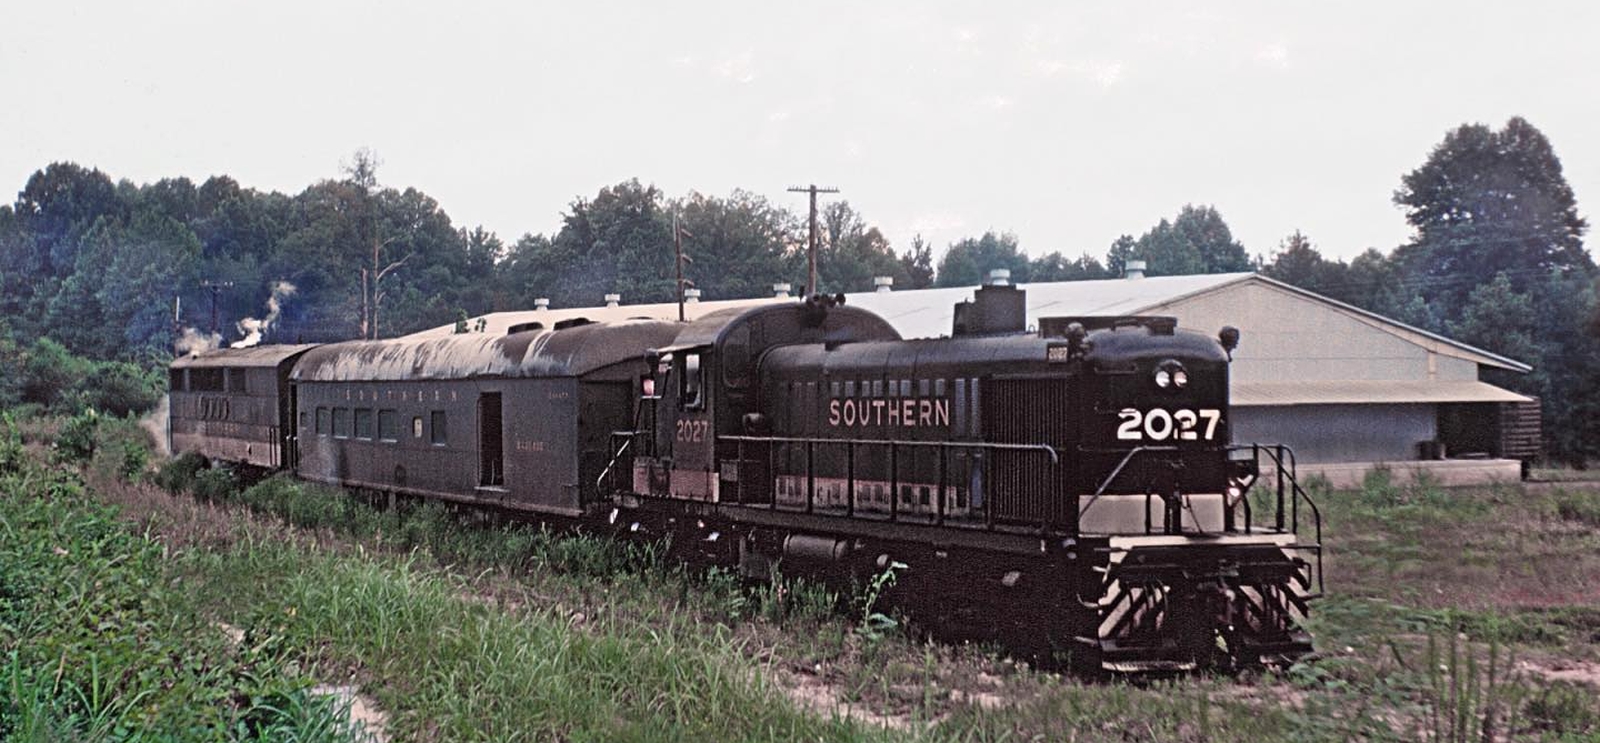 Southern Railway RS-3 No. 2027, together with a combined passenger and baggage car and an EMD FTB converted to a heating car, formed a commuter train in October 1967 in Warrenville, South Carolina